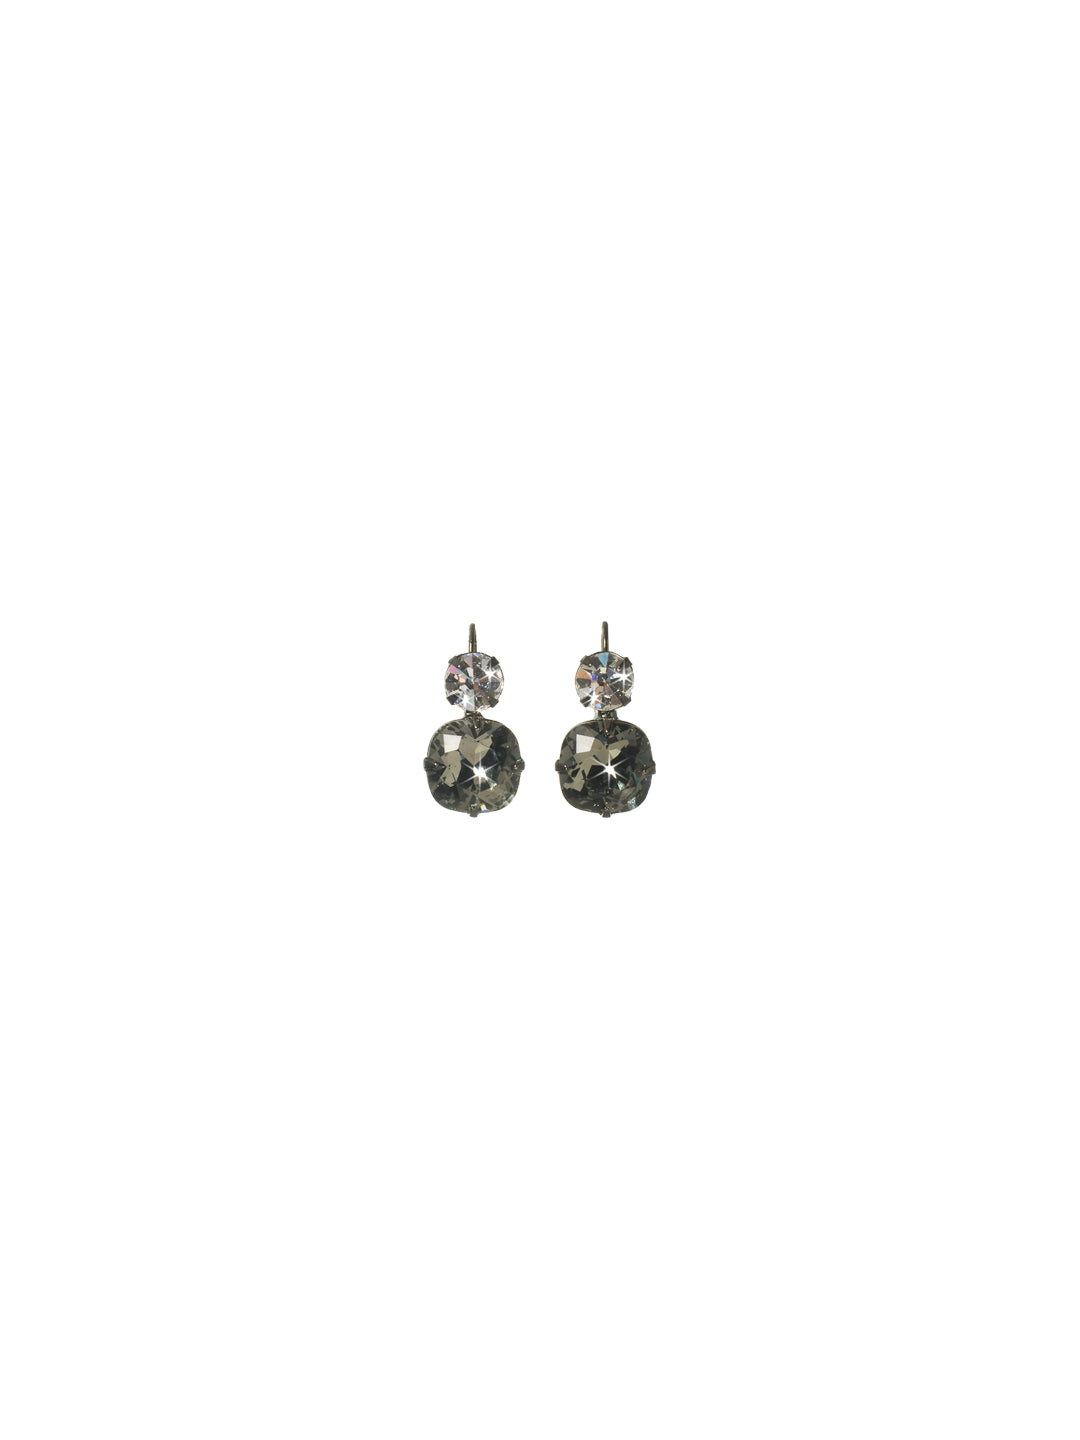 On The Edge Dangle Earrings - ECL4GMBD - <p>It's simple - round and cushion cut crystals on a french wire earring. These earrings go with anything! You can rest easy knowing you have the perfect go-to pair of earrings in your jewelry box. From Sorrelli's Black Diamond collection in our Gun Metal finish.</p>